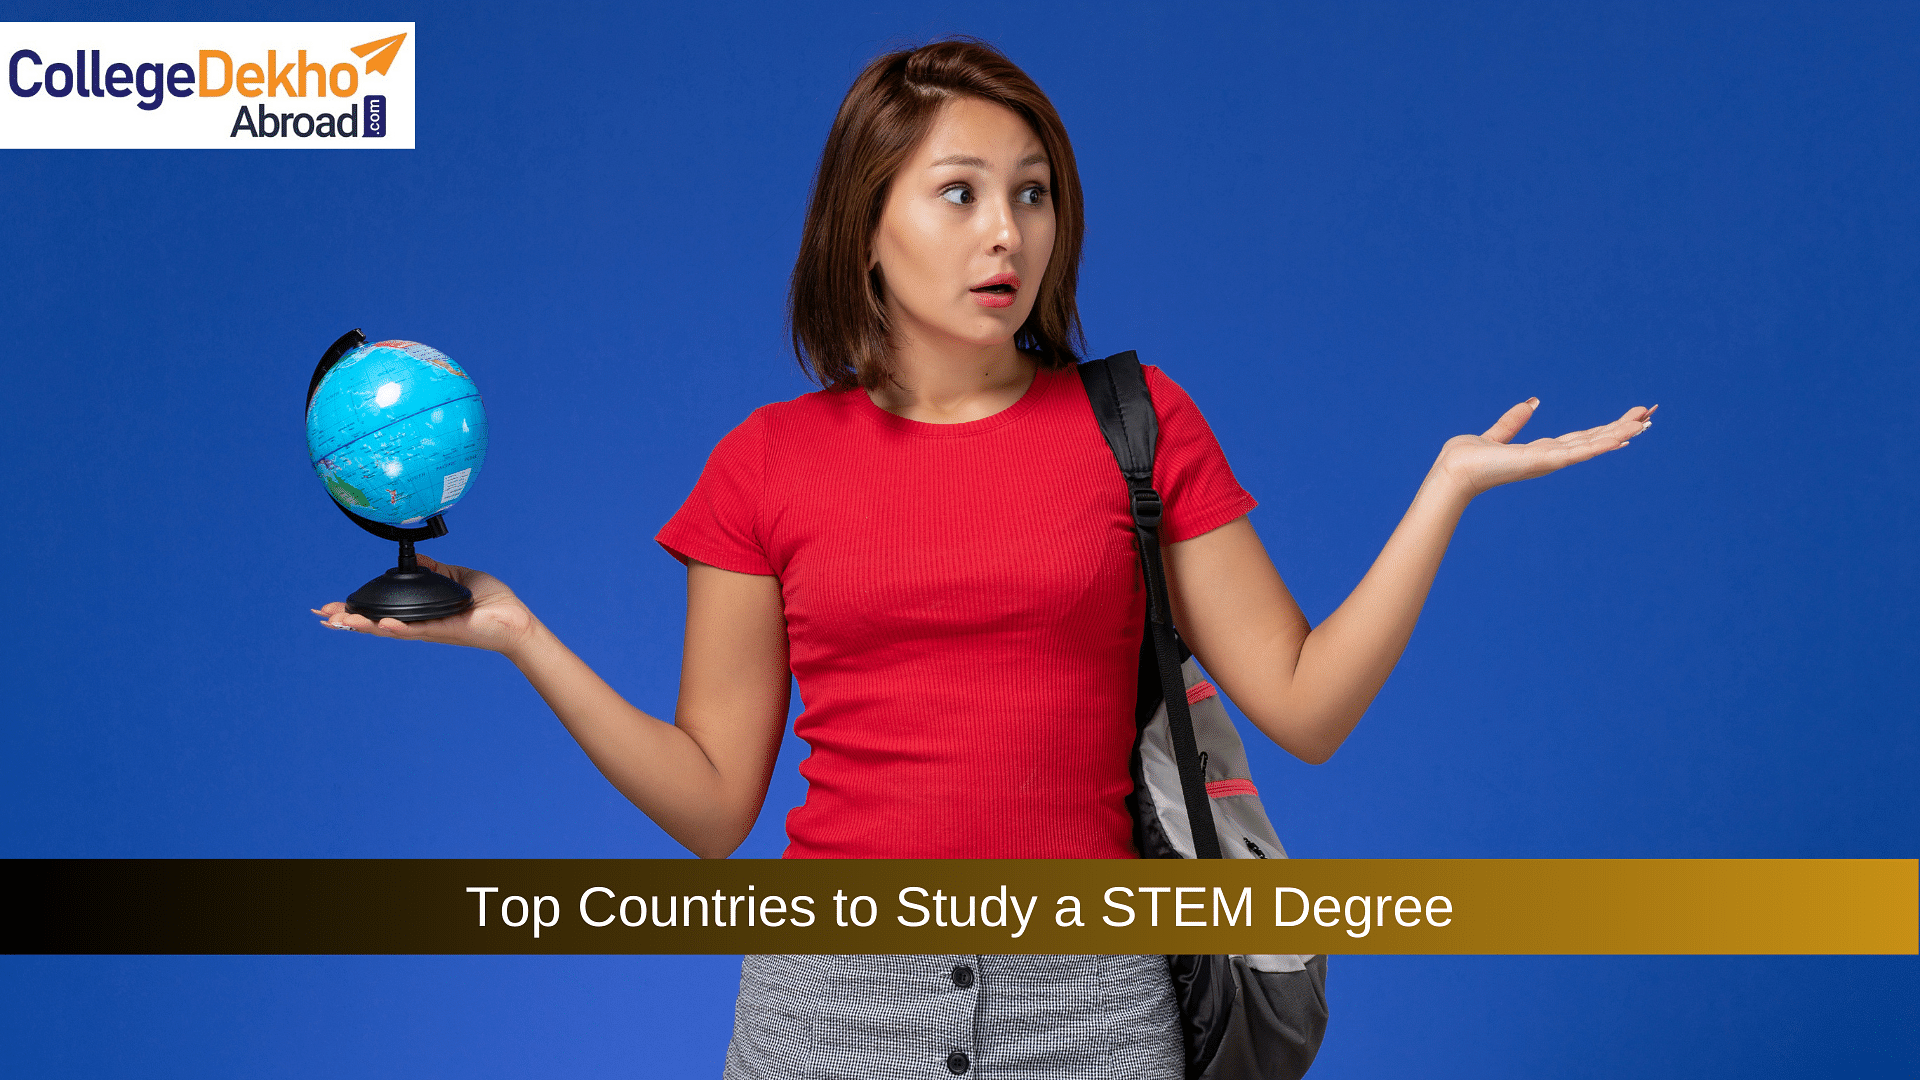 Top Countries to Study a STEM Degree